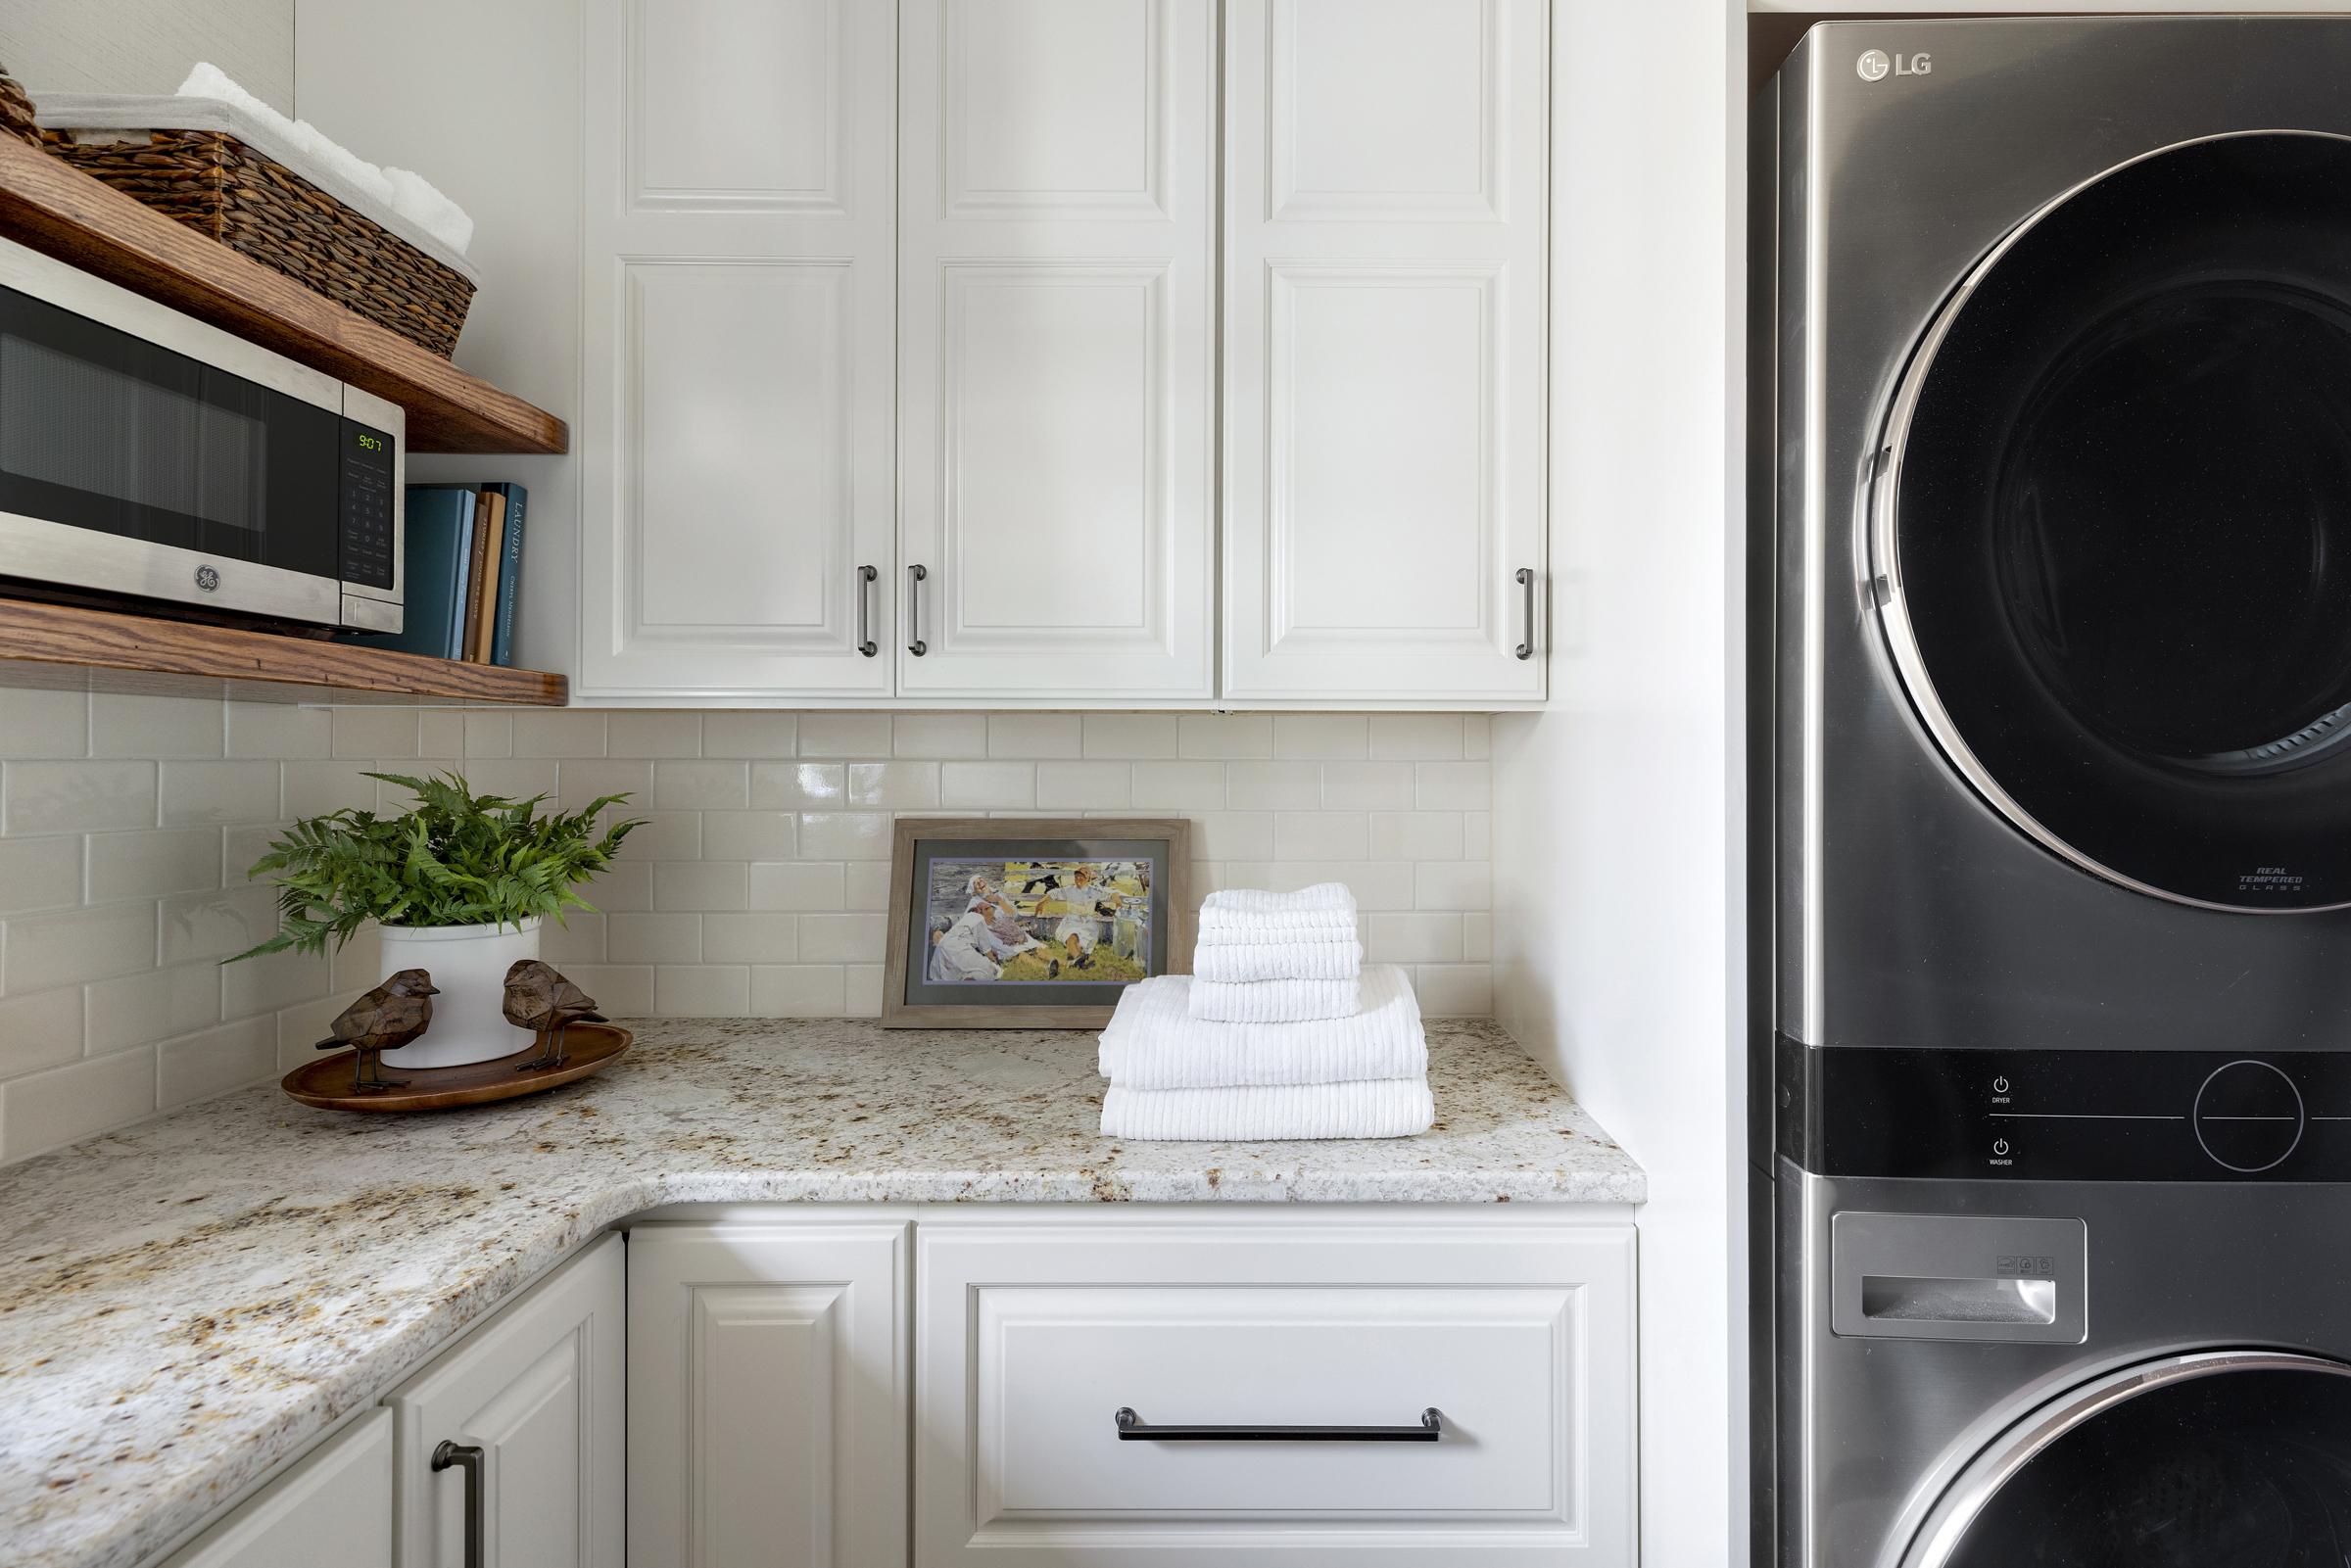 Laundry room model with stacked washer and dryer, white subway tile, and wooden floating shelves